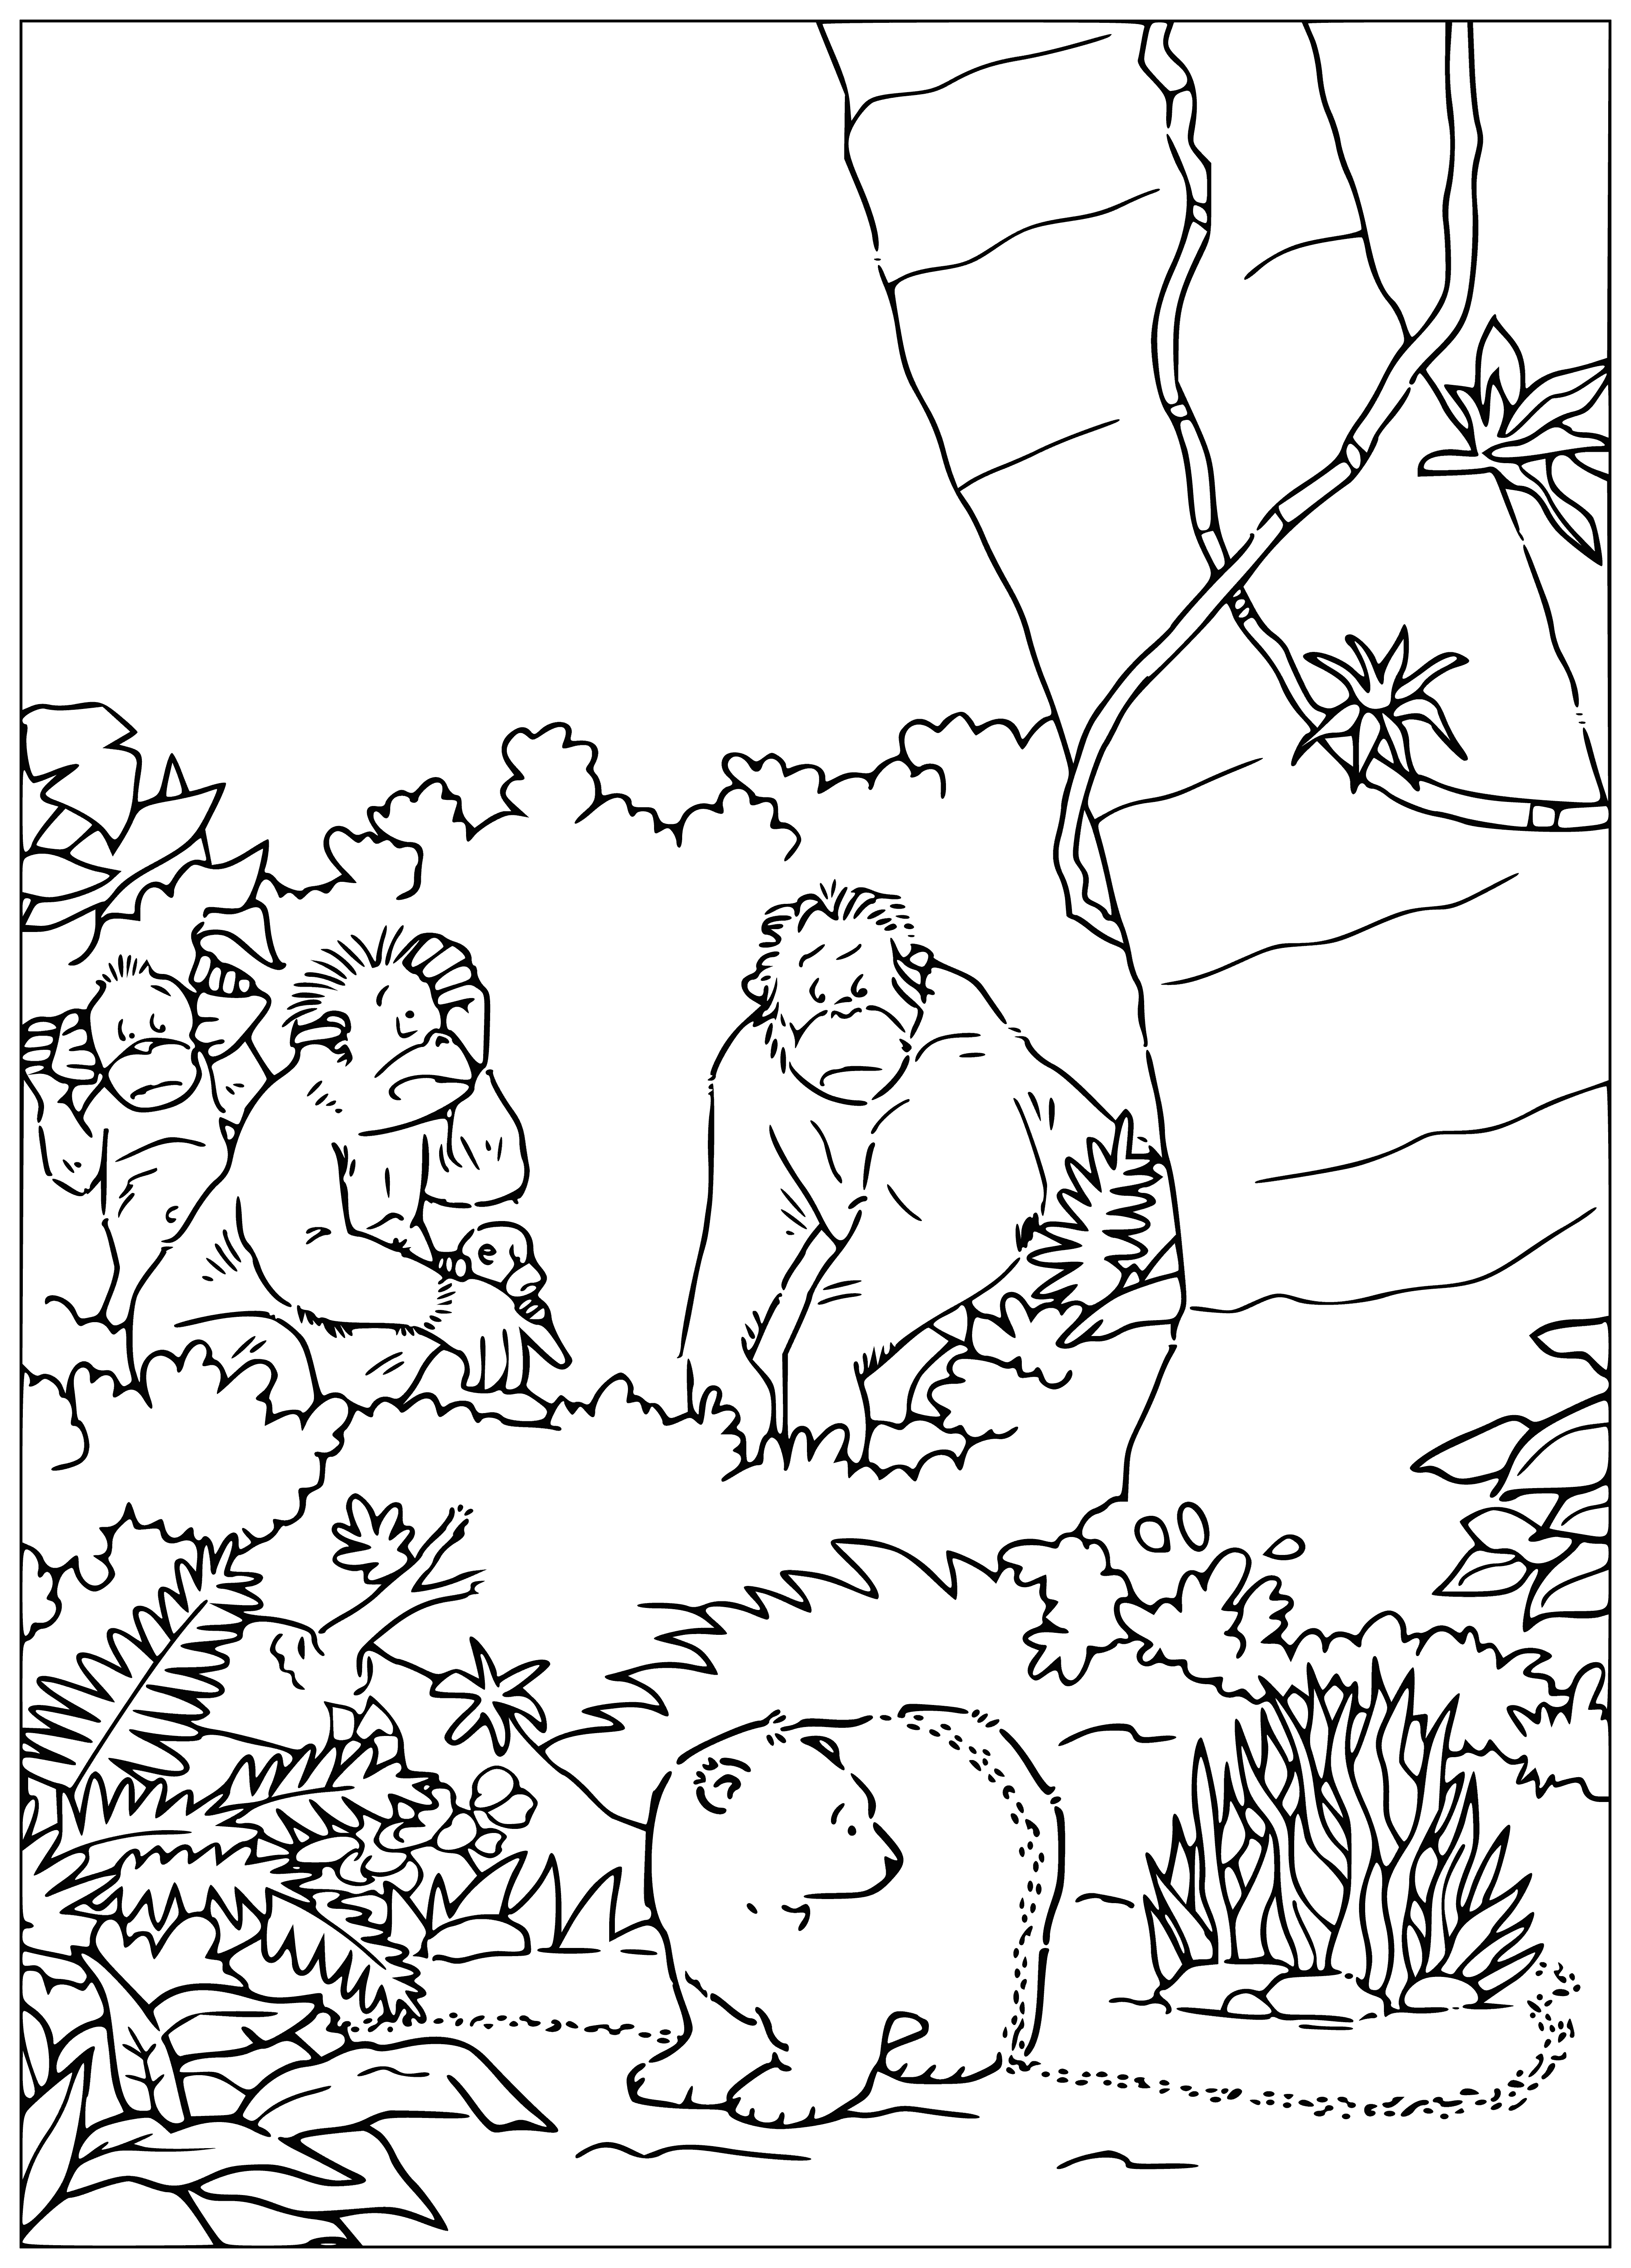 Lars and the ants coloring page